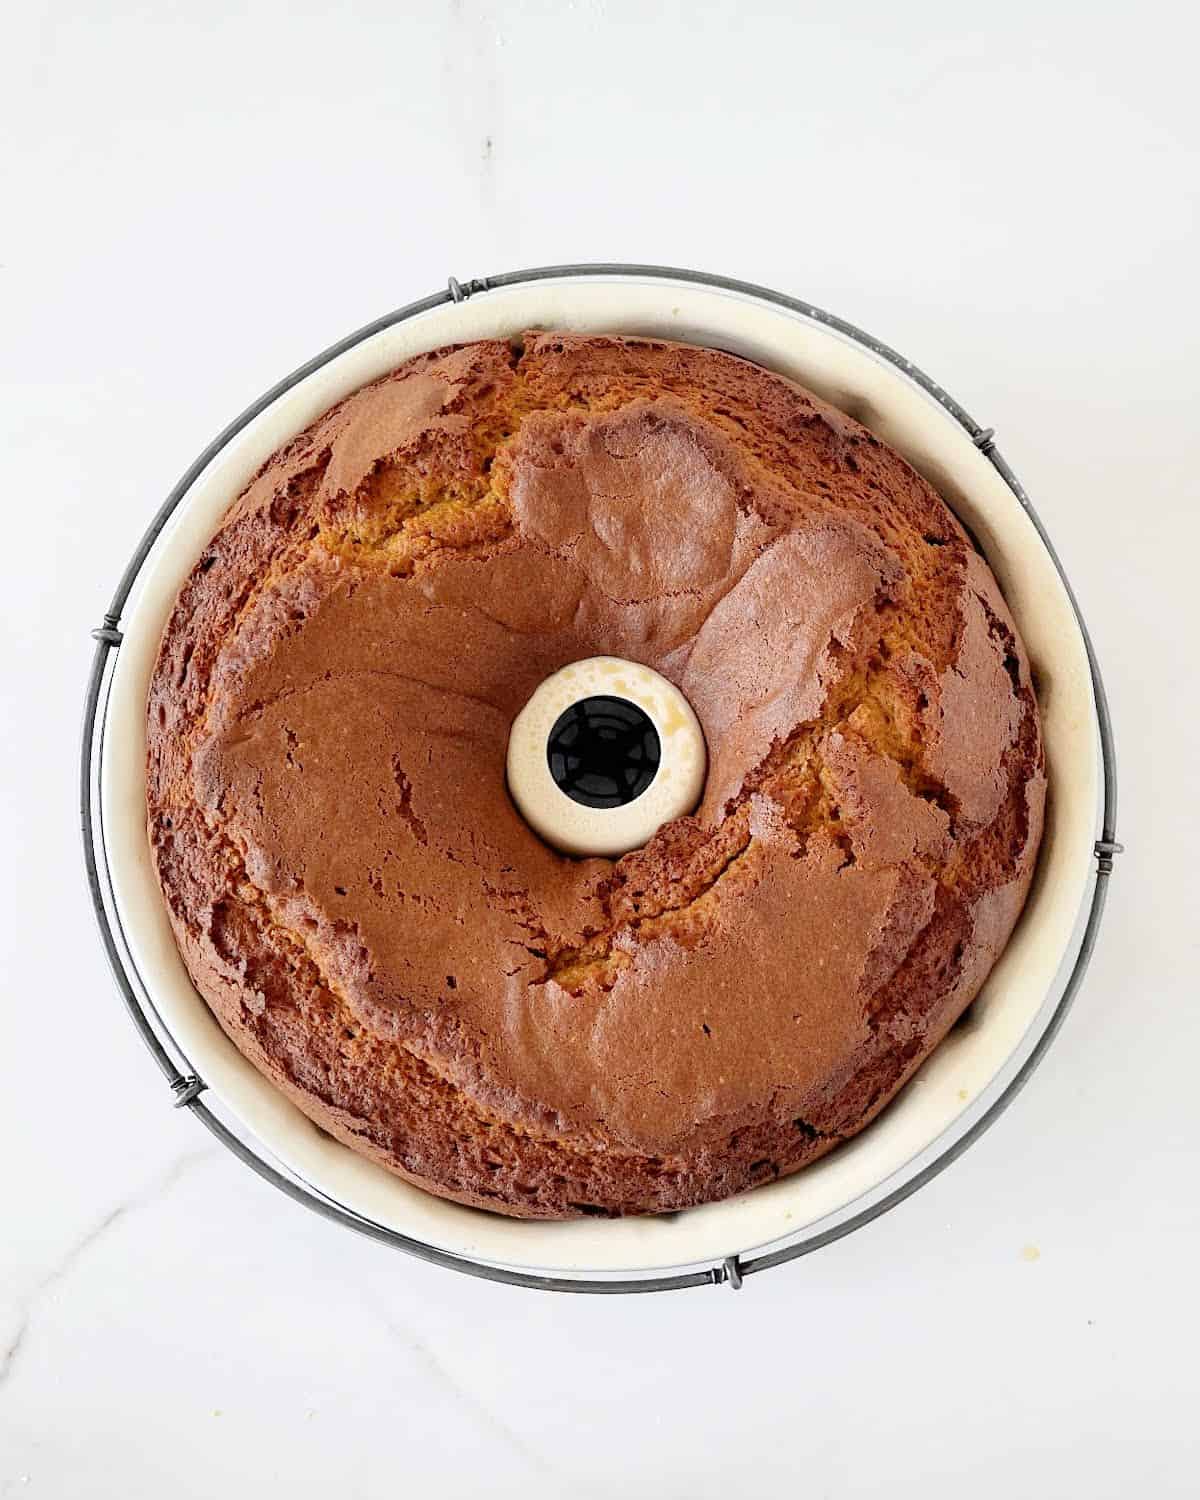 Baked pumpkin bundt cake in the pan on a wire rack. White marbled surface.